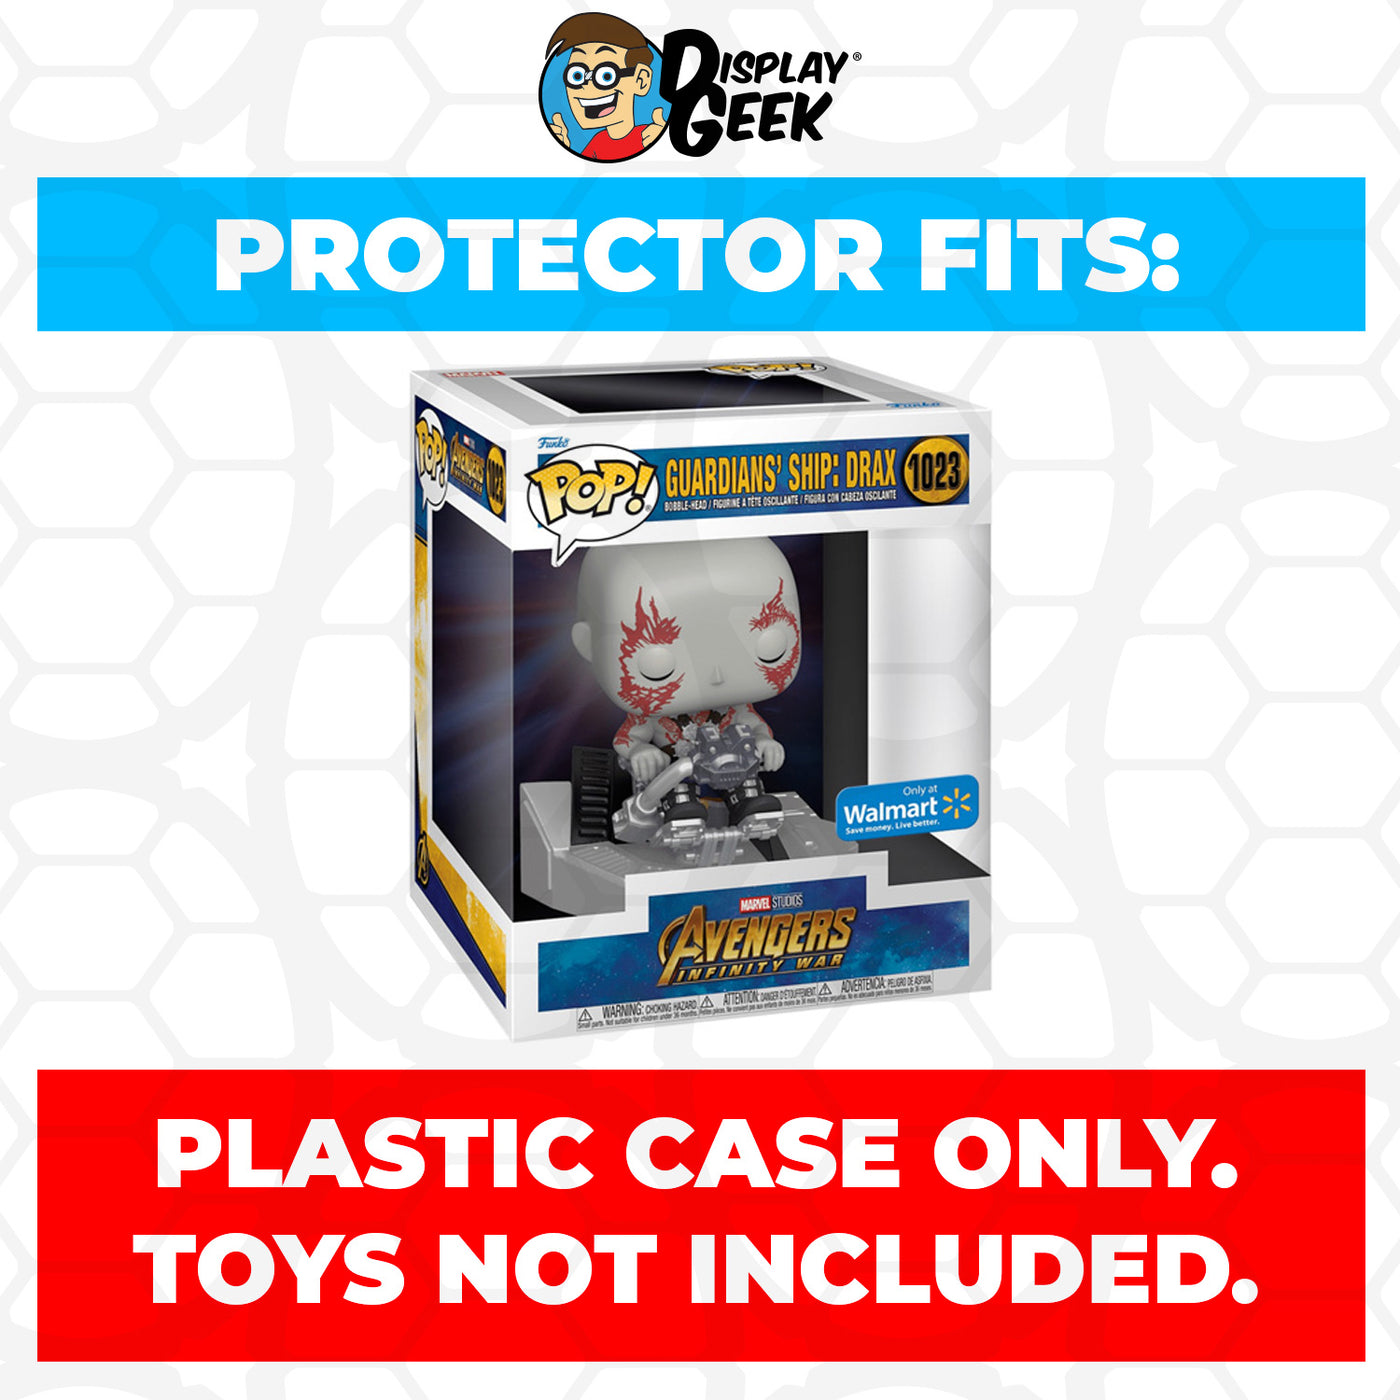 Pop Protector for Guardians Ship Drax in Benatar #1023 Funko Pop Deluxe on The Protector Guide App by Display Geek